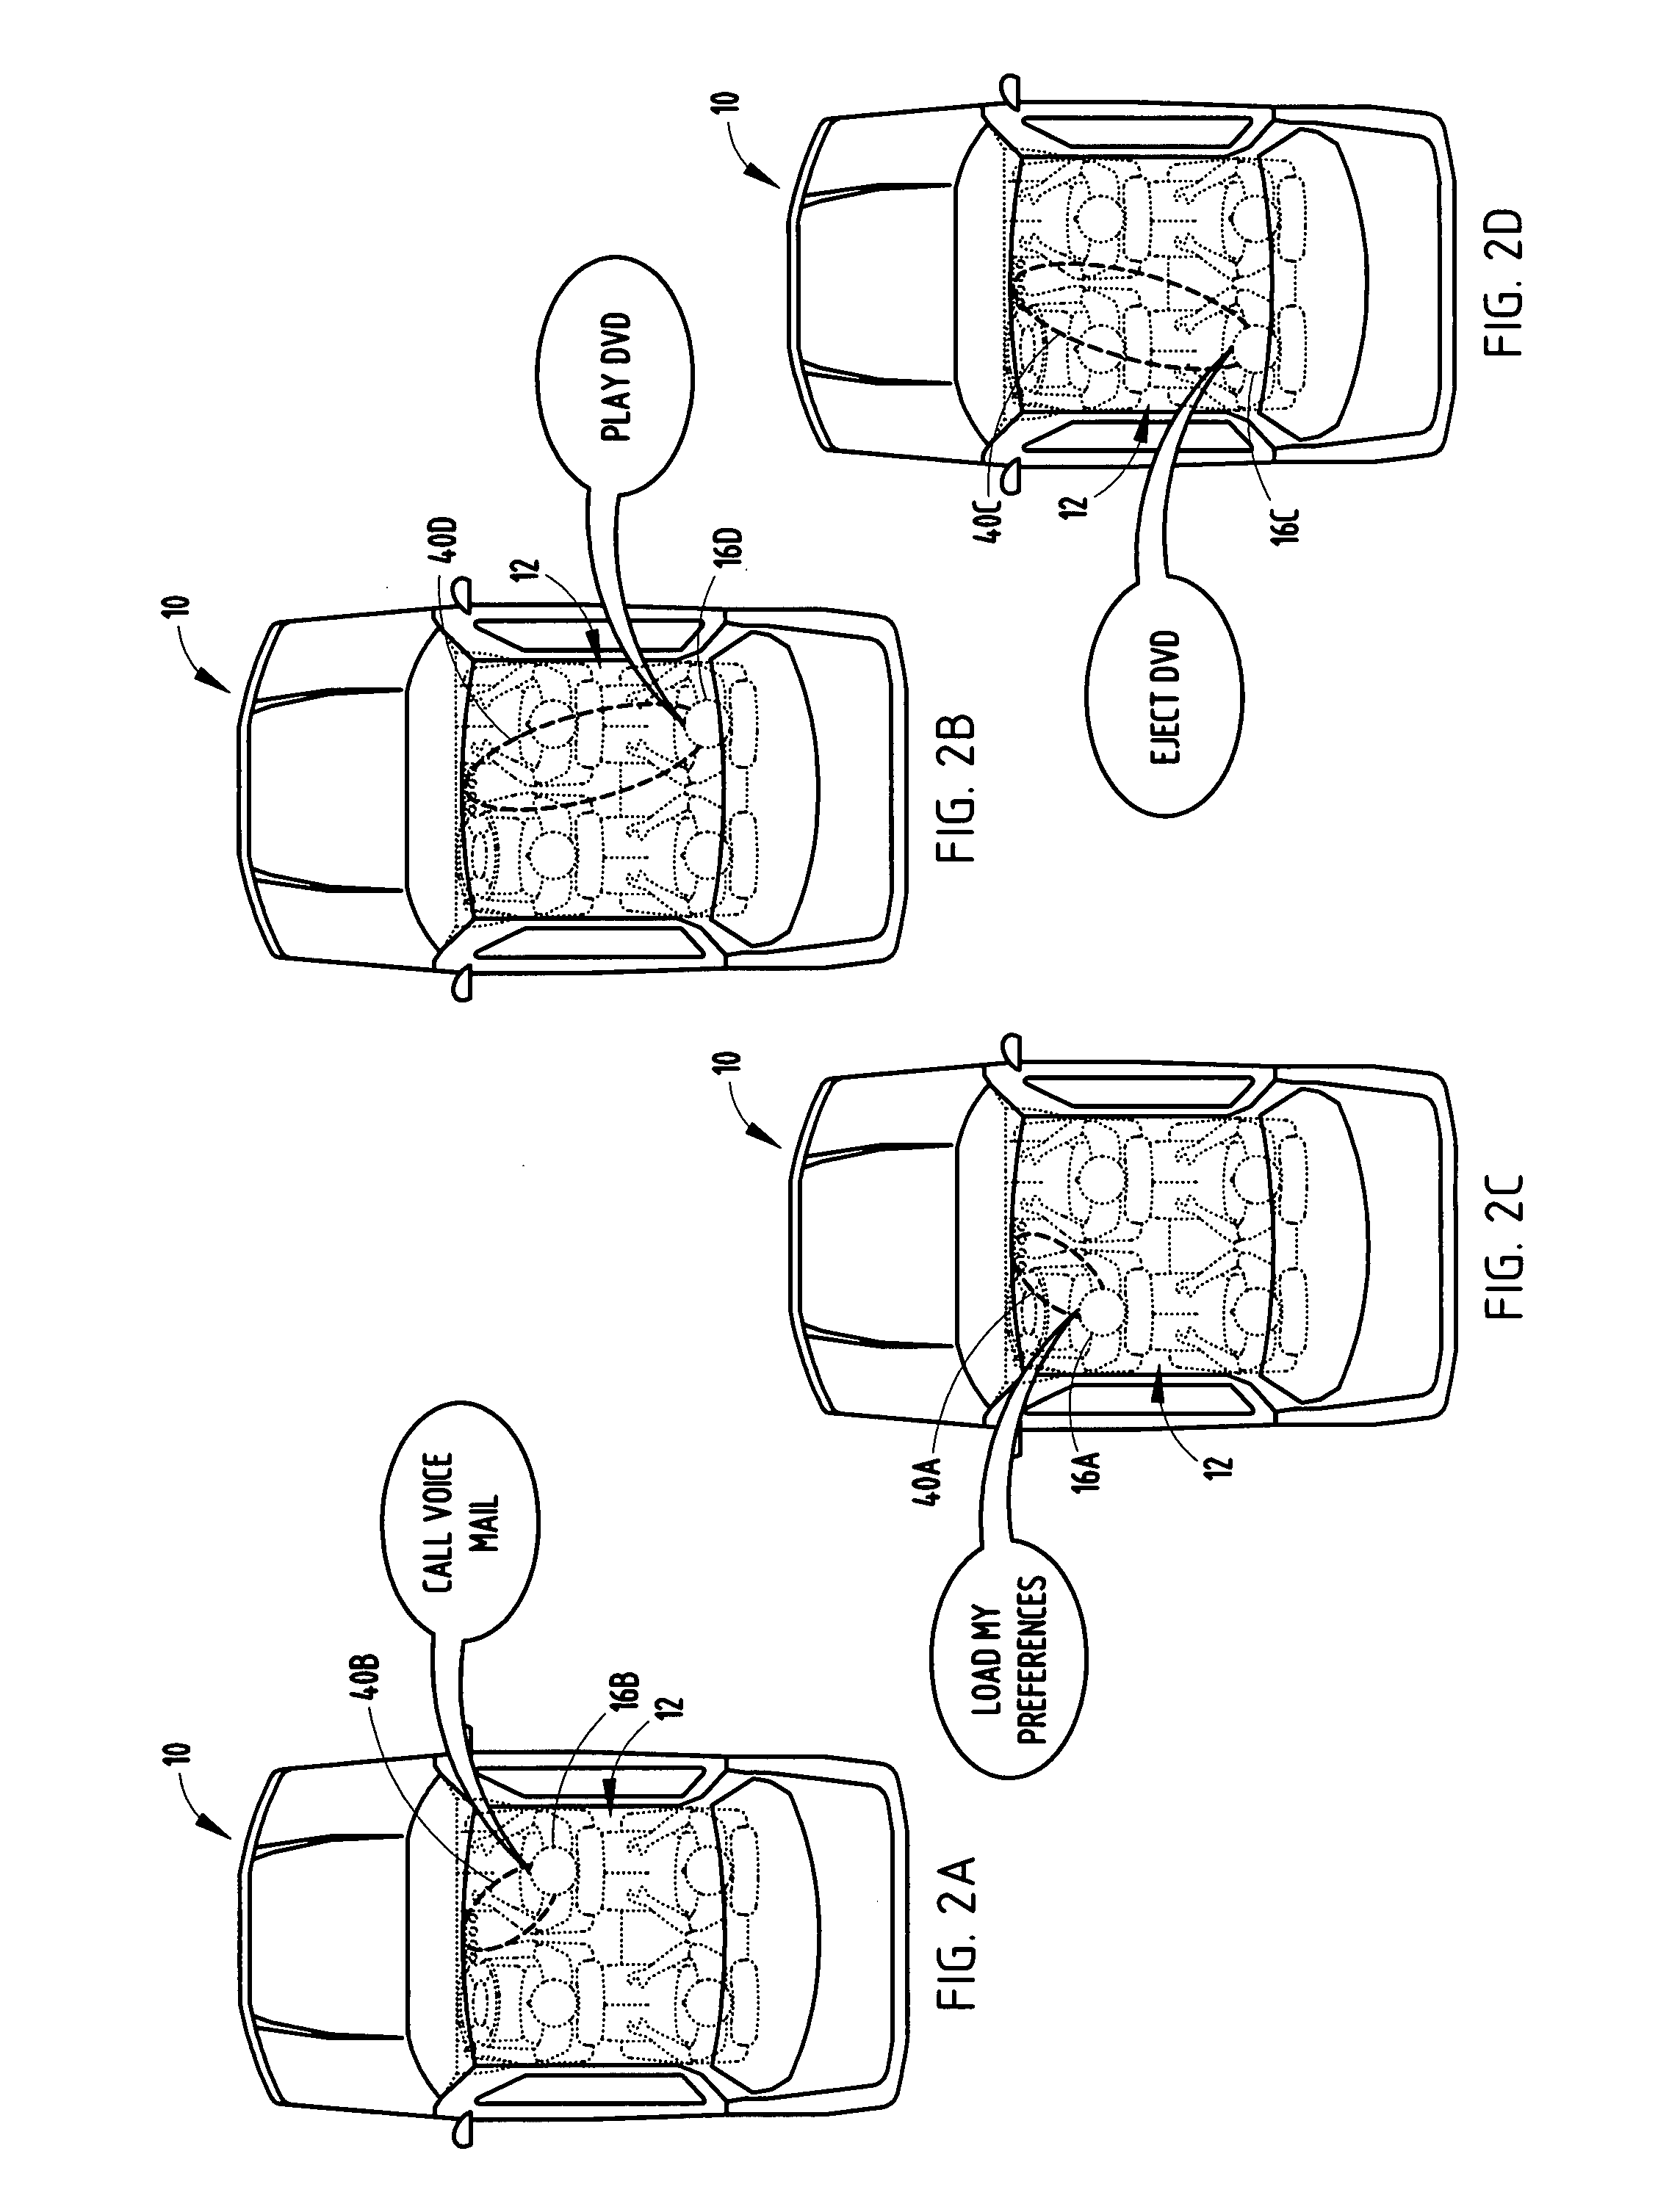 System and method for optimizing speech recognition in a vehicle